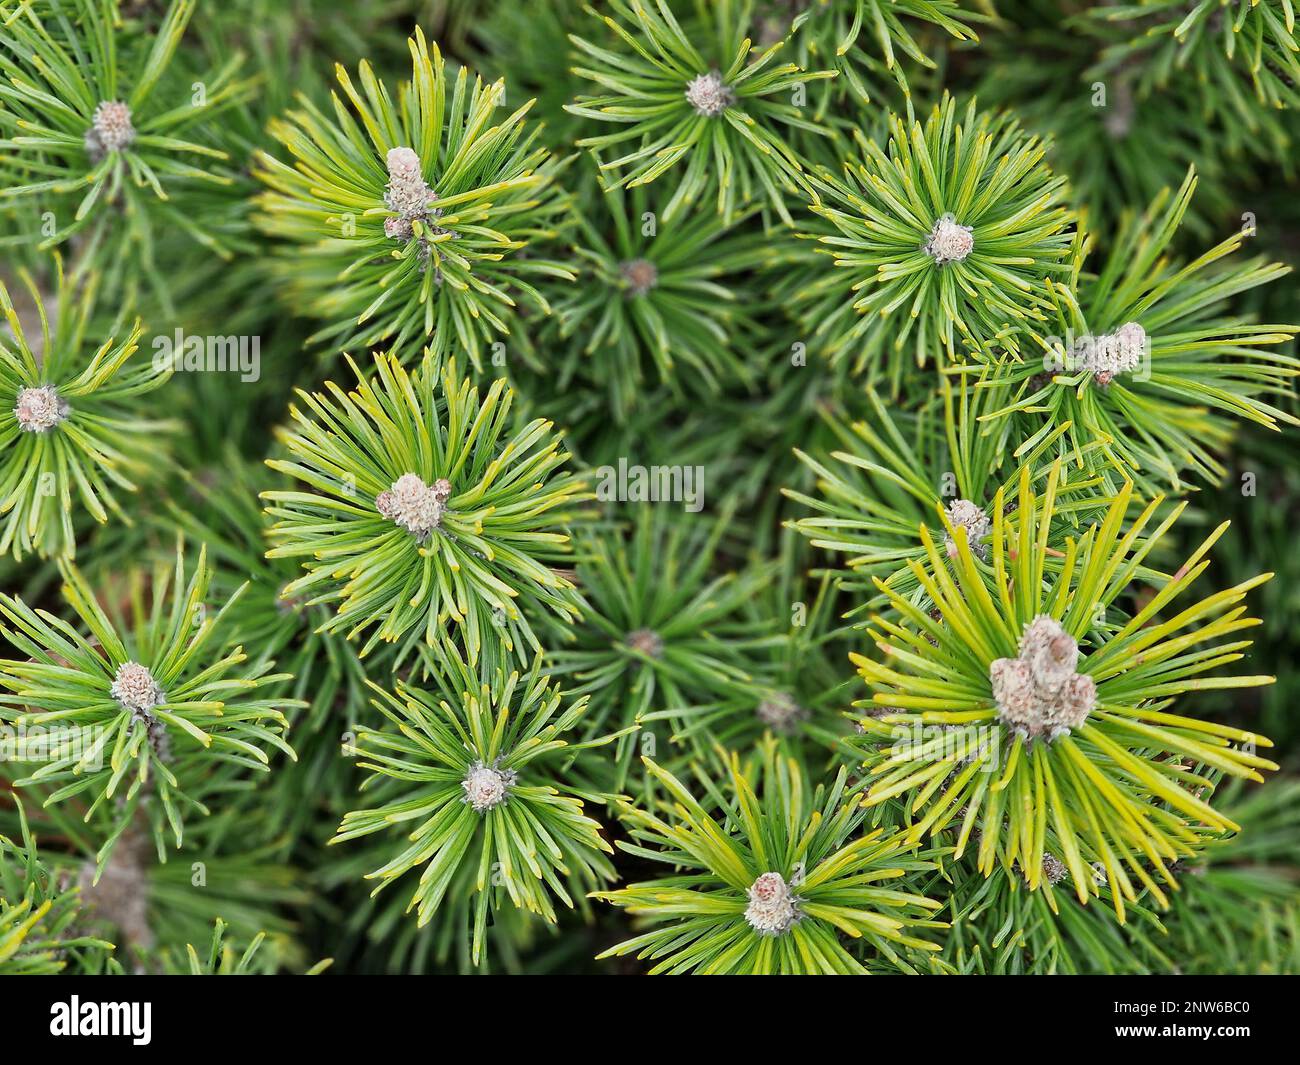 Closeup of the evergreen low and slow growing pine Pinus mugo Mops. Stock Photo